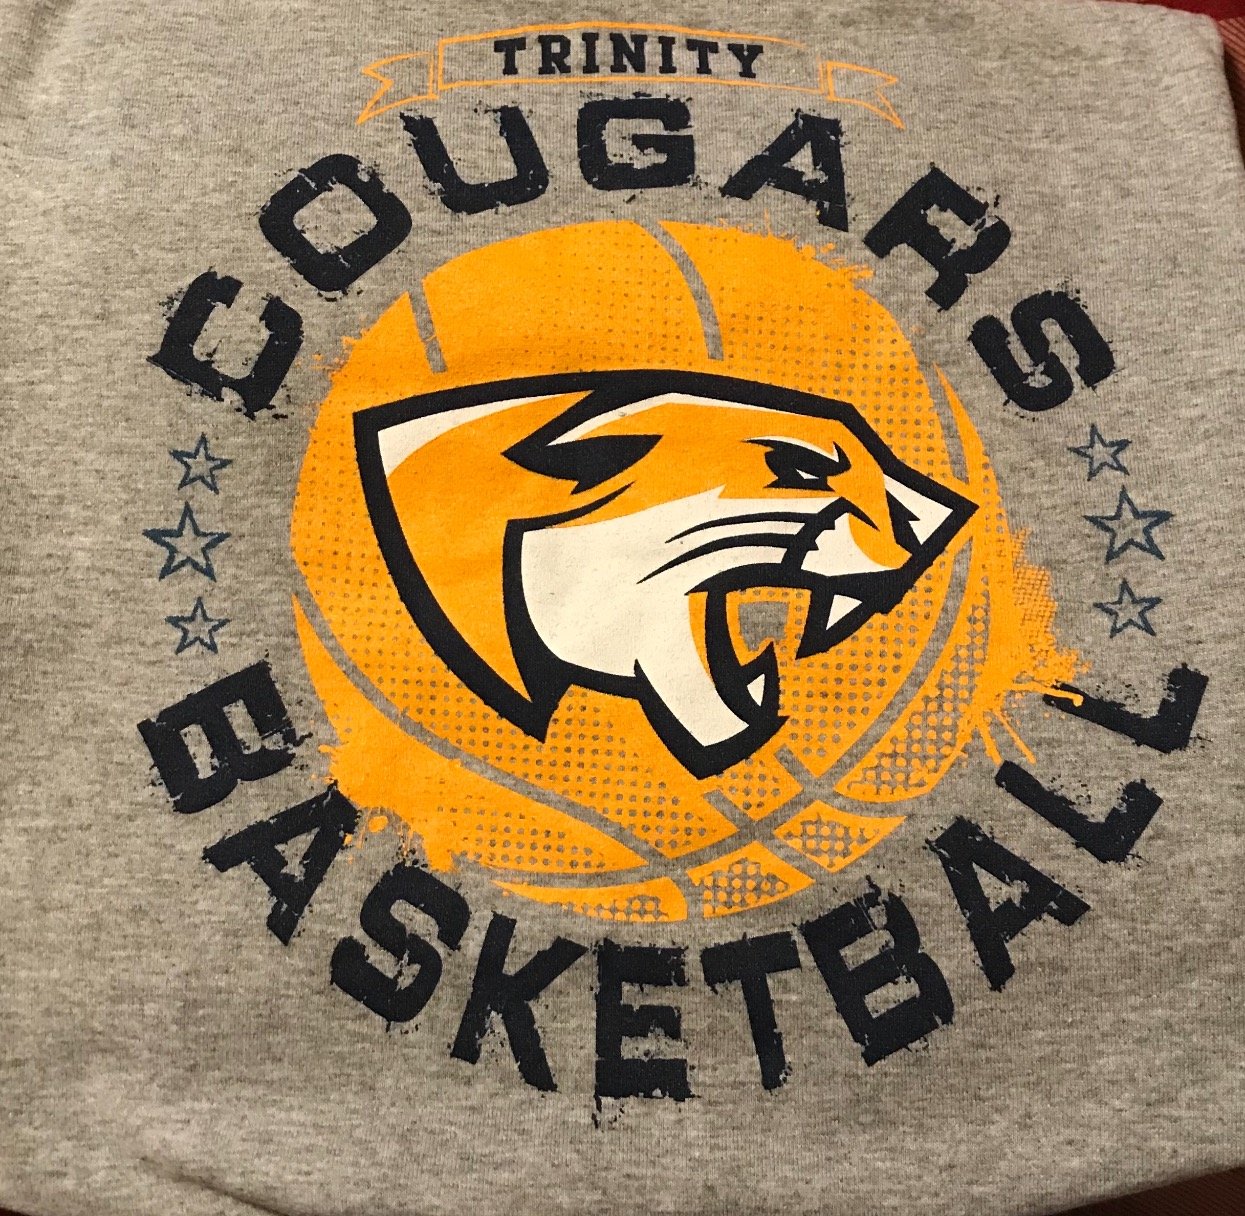 Trinity Lutheran Lady Cougar Basketball. 7 time sectional champions 2013, 2014, 2018, 2020, 2021, 2022, 2023